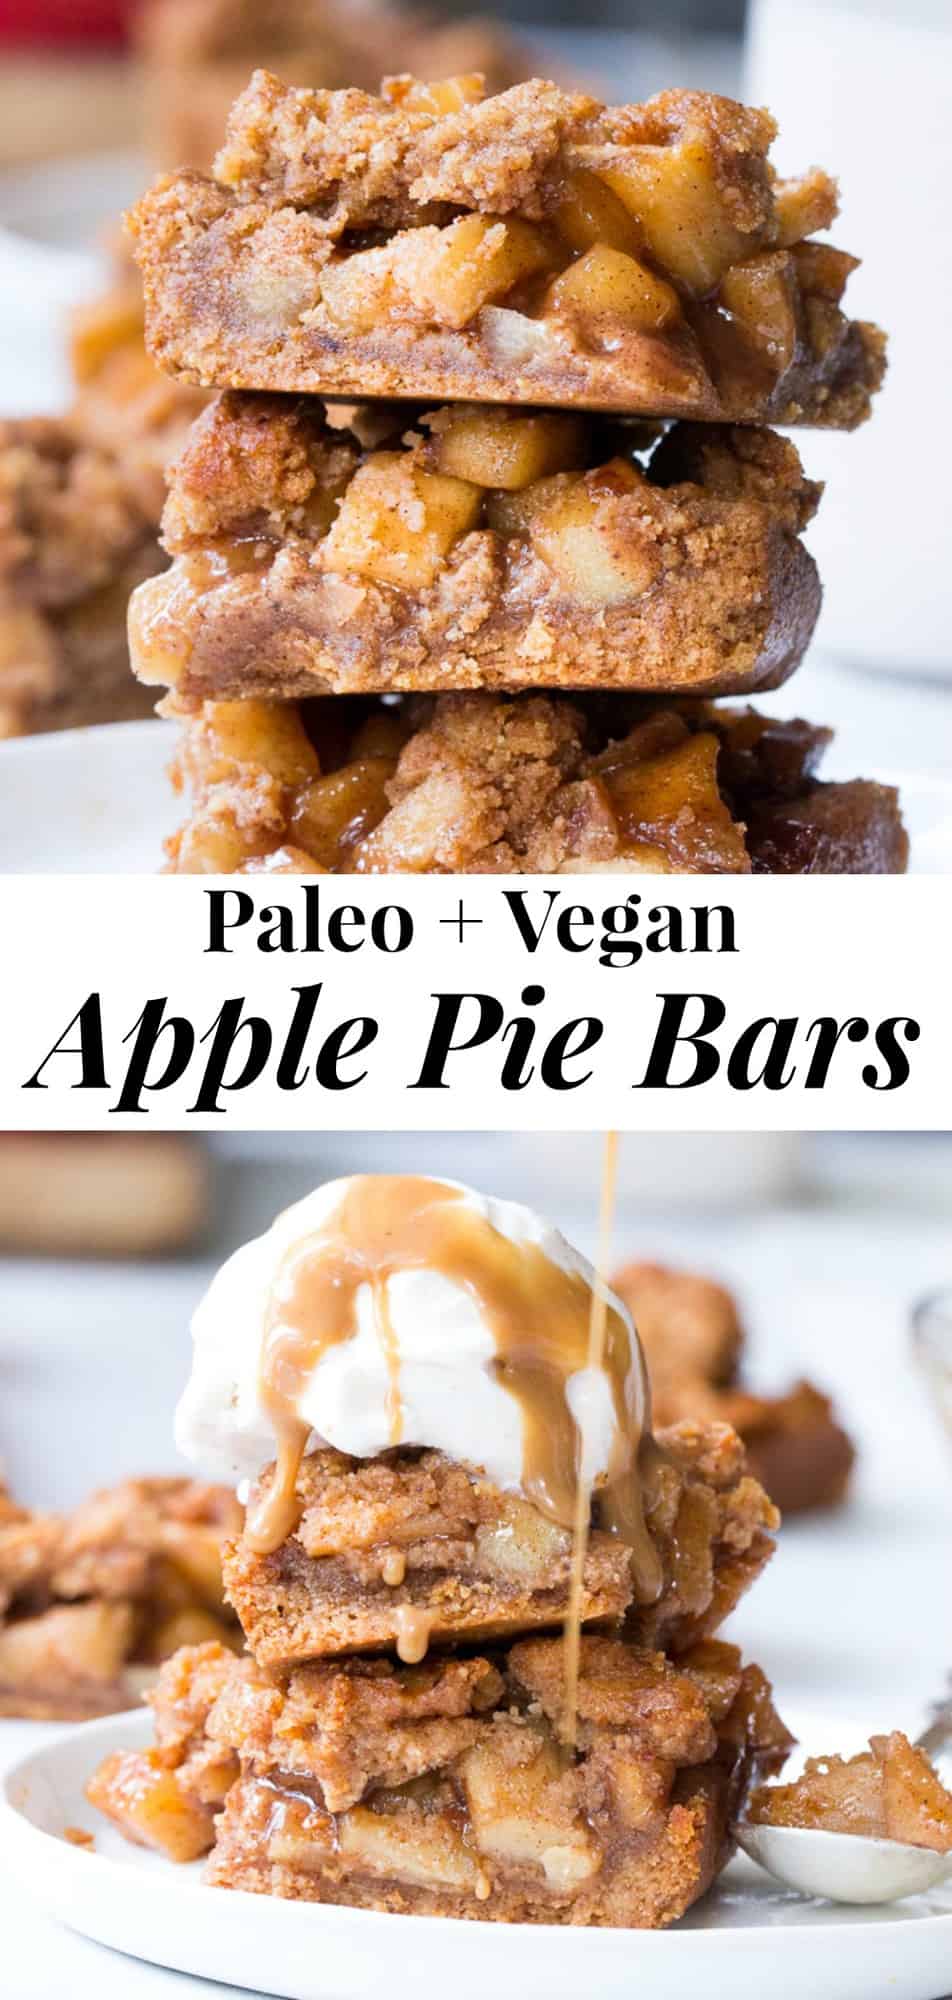 These vegan and Paleo apple pie bars have a delicious almond butter crust and crumb top and perfect gooey sweet apple pie filling!  They're a fun healthy dessert to make and eat with kids, gluten-free, dairy-free, paleo and vegan.  #paleo #vegan #glutenfree 